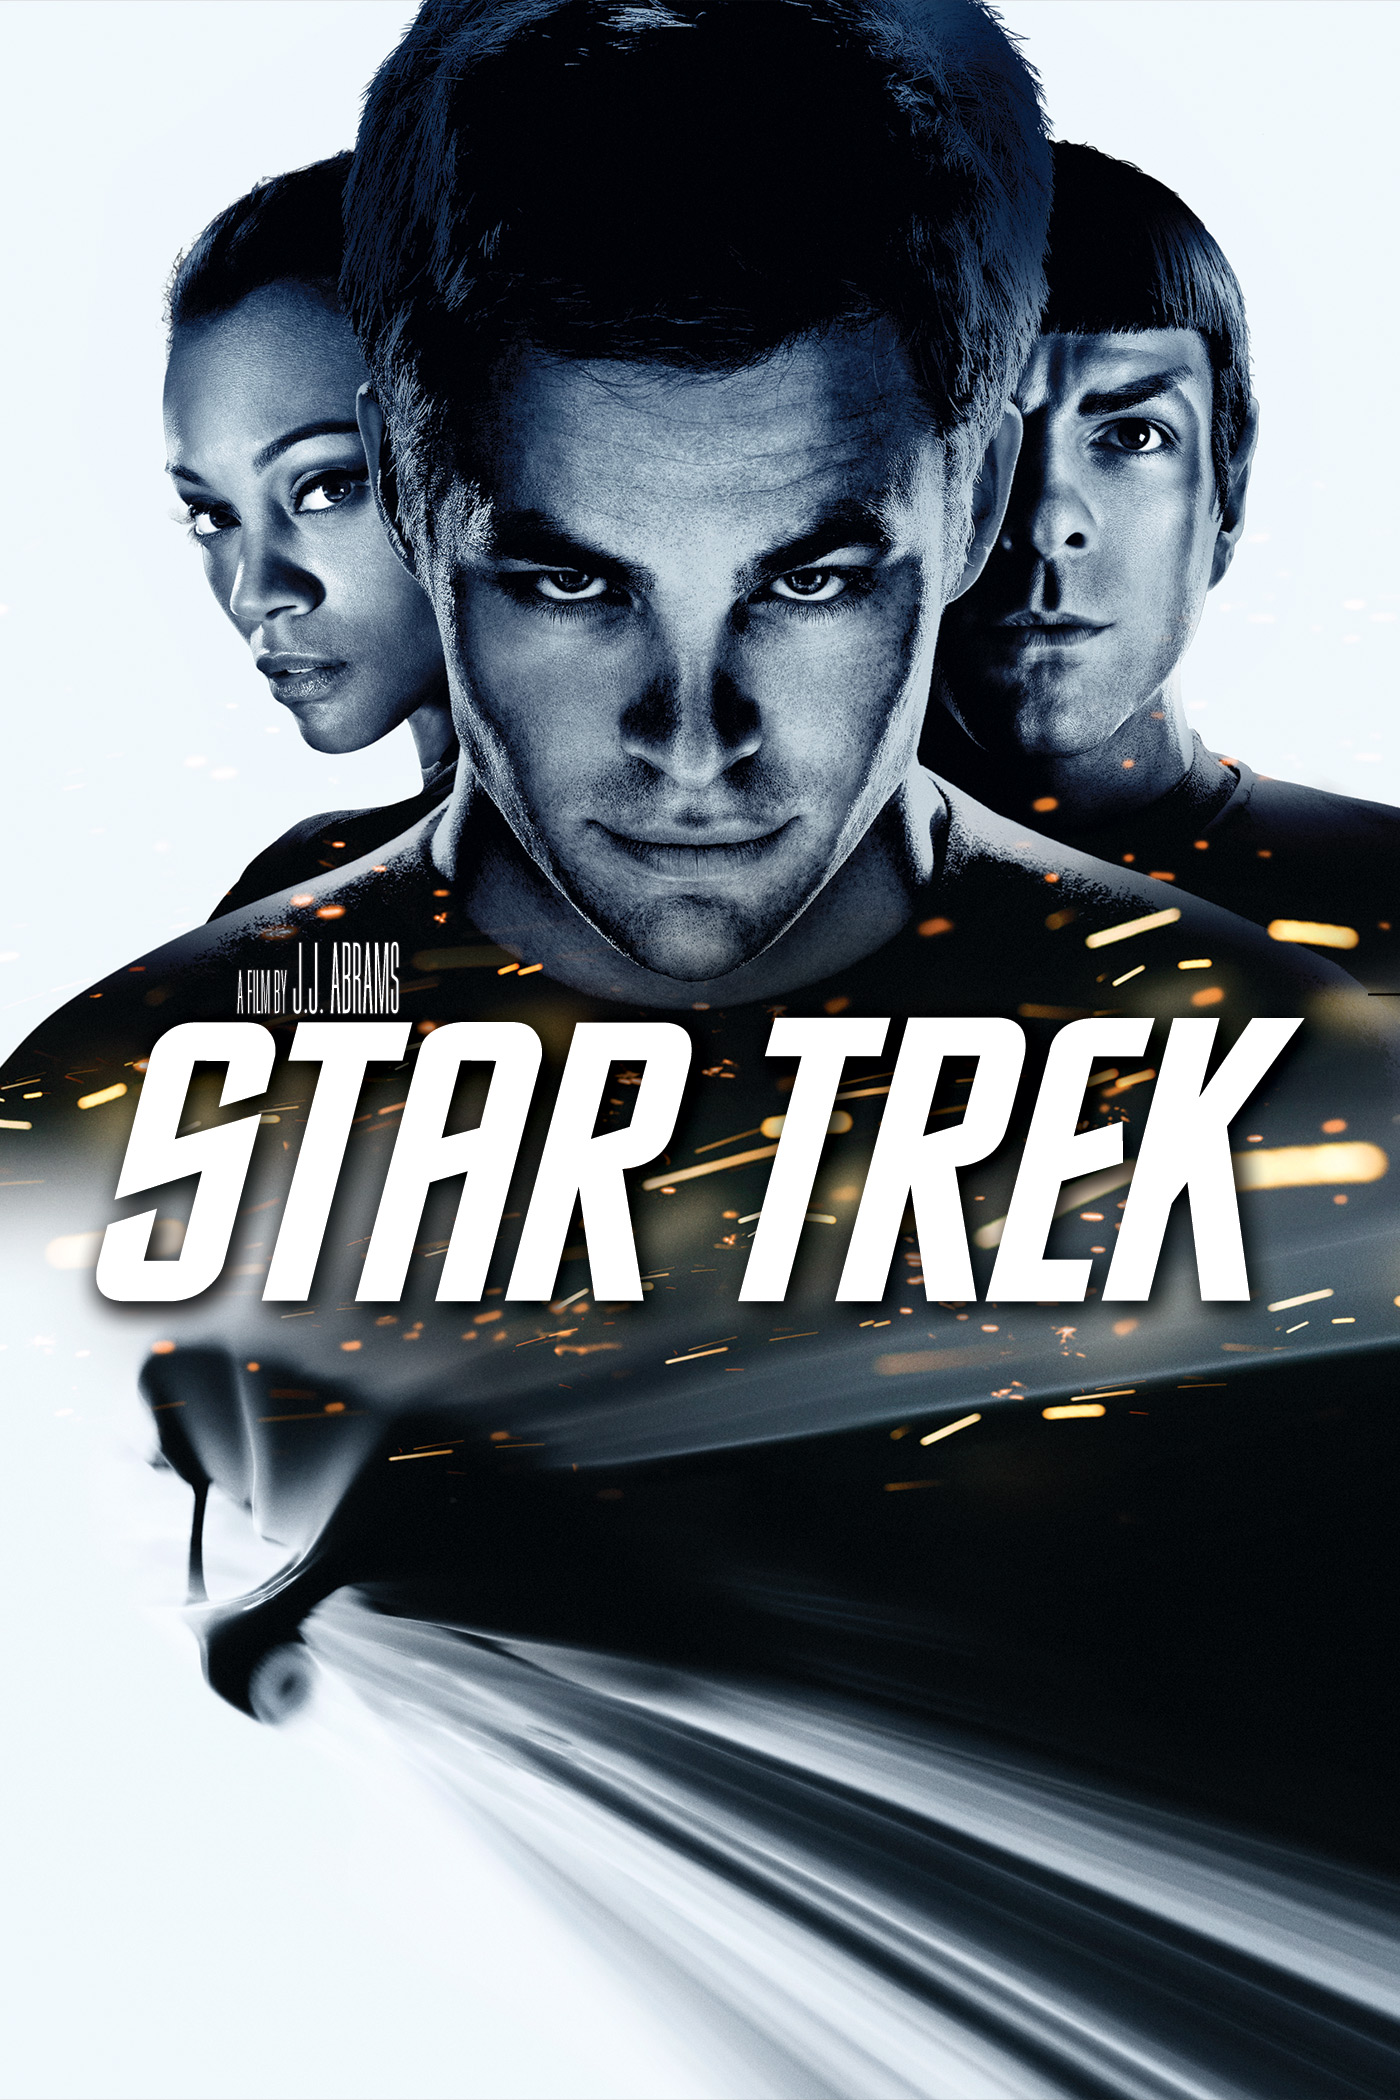 Digital 4K/HD Movies: Set Your Phasers to Fun! - 2 or more starting at $4.99 ea (w/ 10% Discount) - Fanflix $4.5